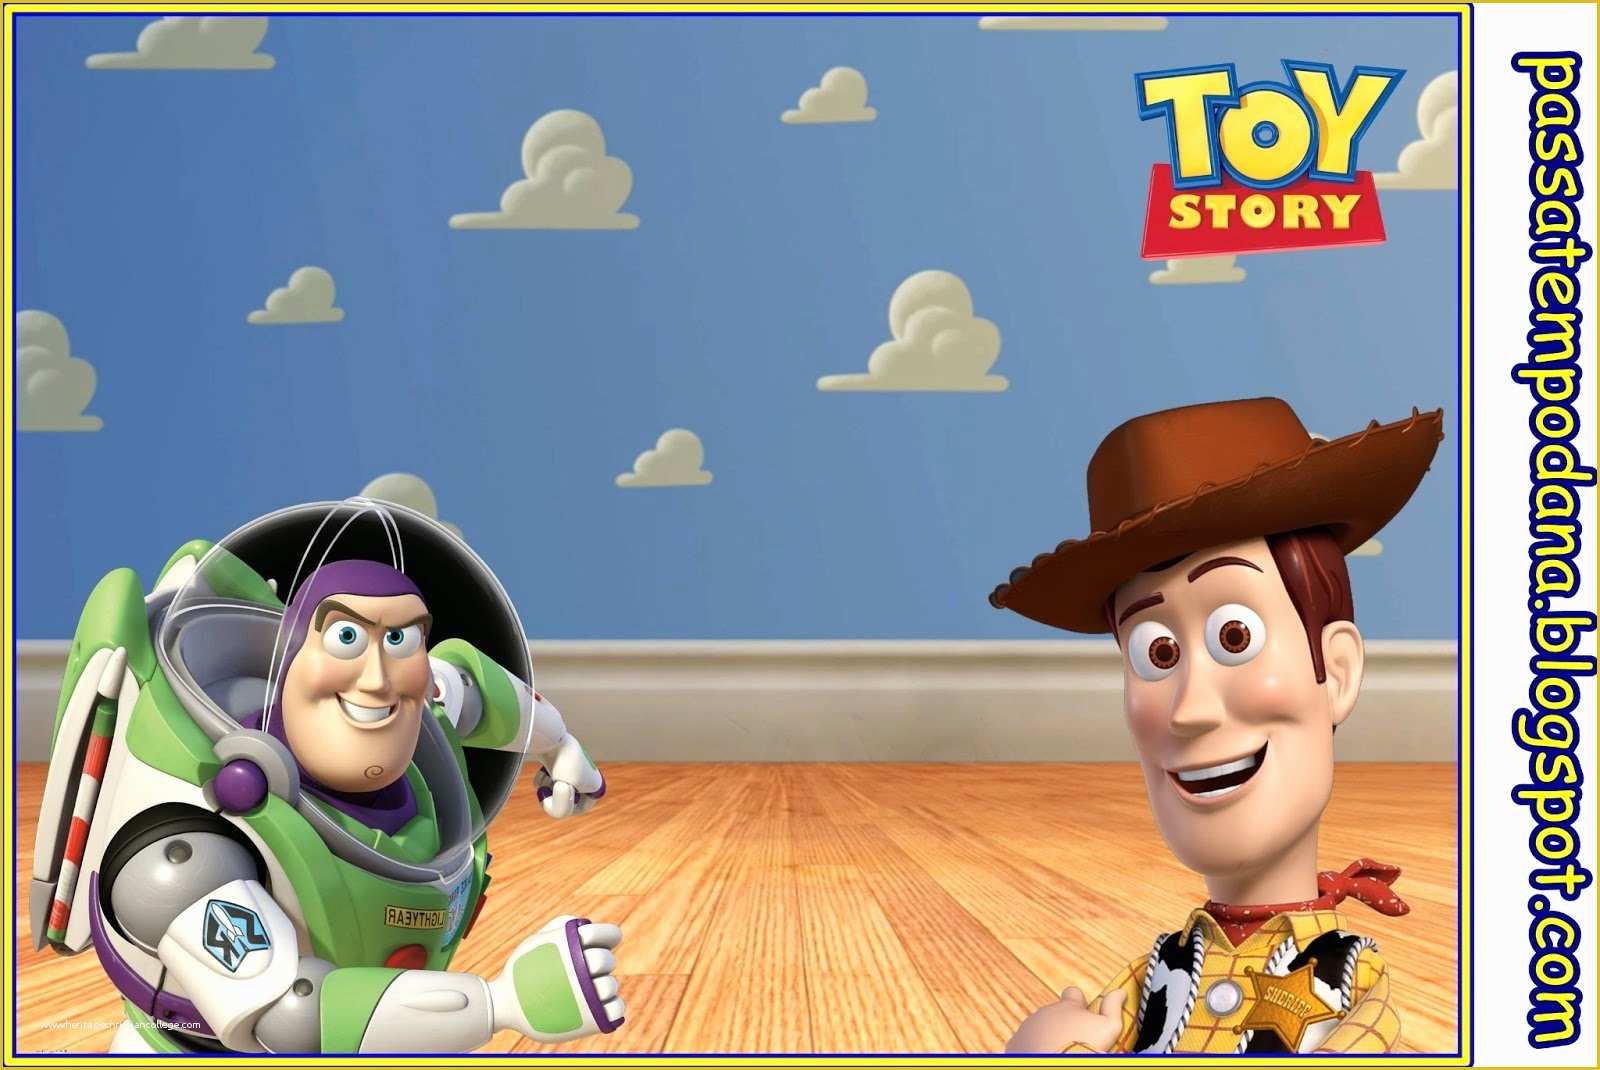 Toy Story Invitation Template Free Download Of toy Story Free Printable Candy Bar Labels and toppers